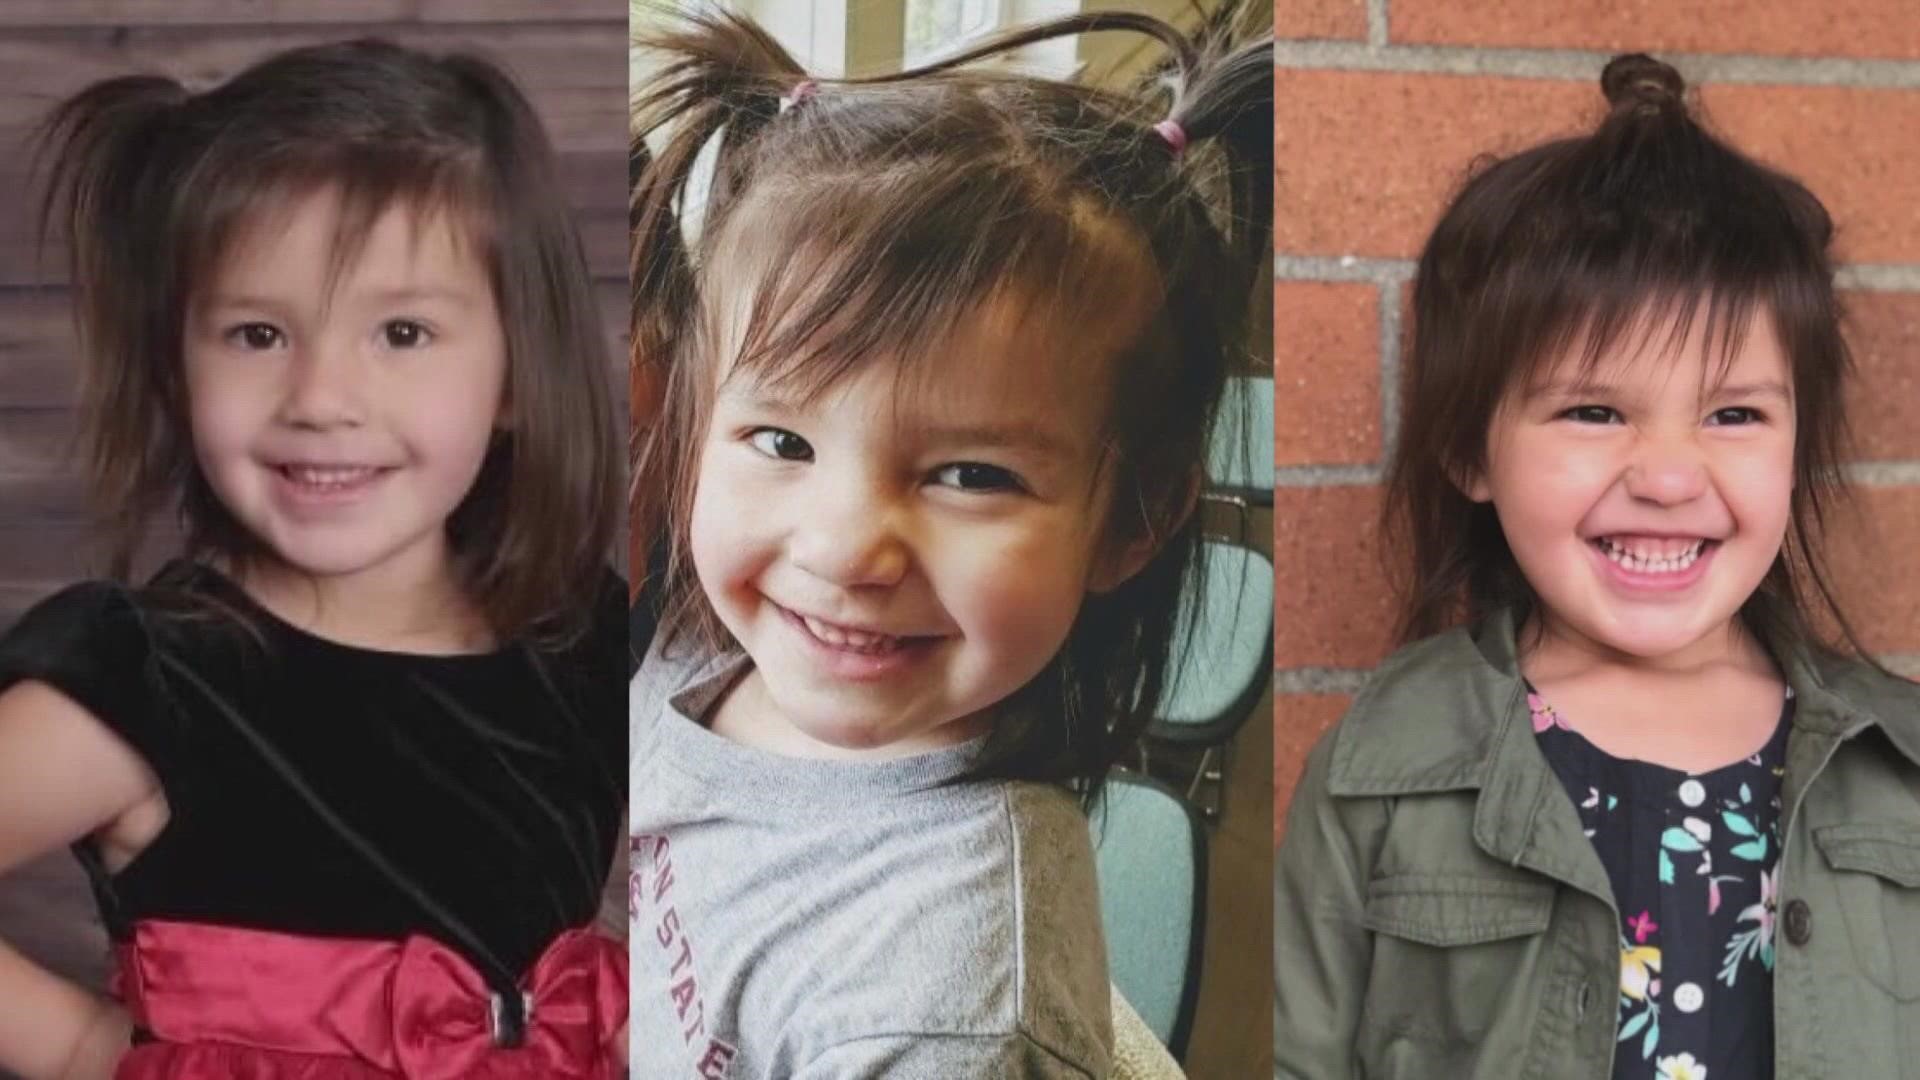 It's been one year since a Grays Harbor County girl, Oakley Carlson, was reported missing.